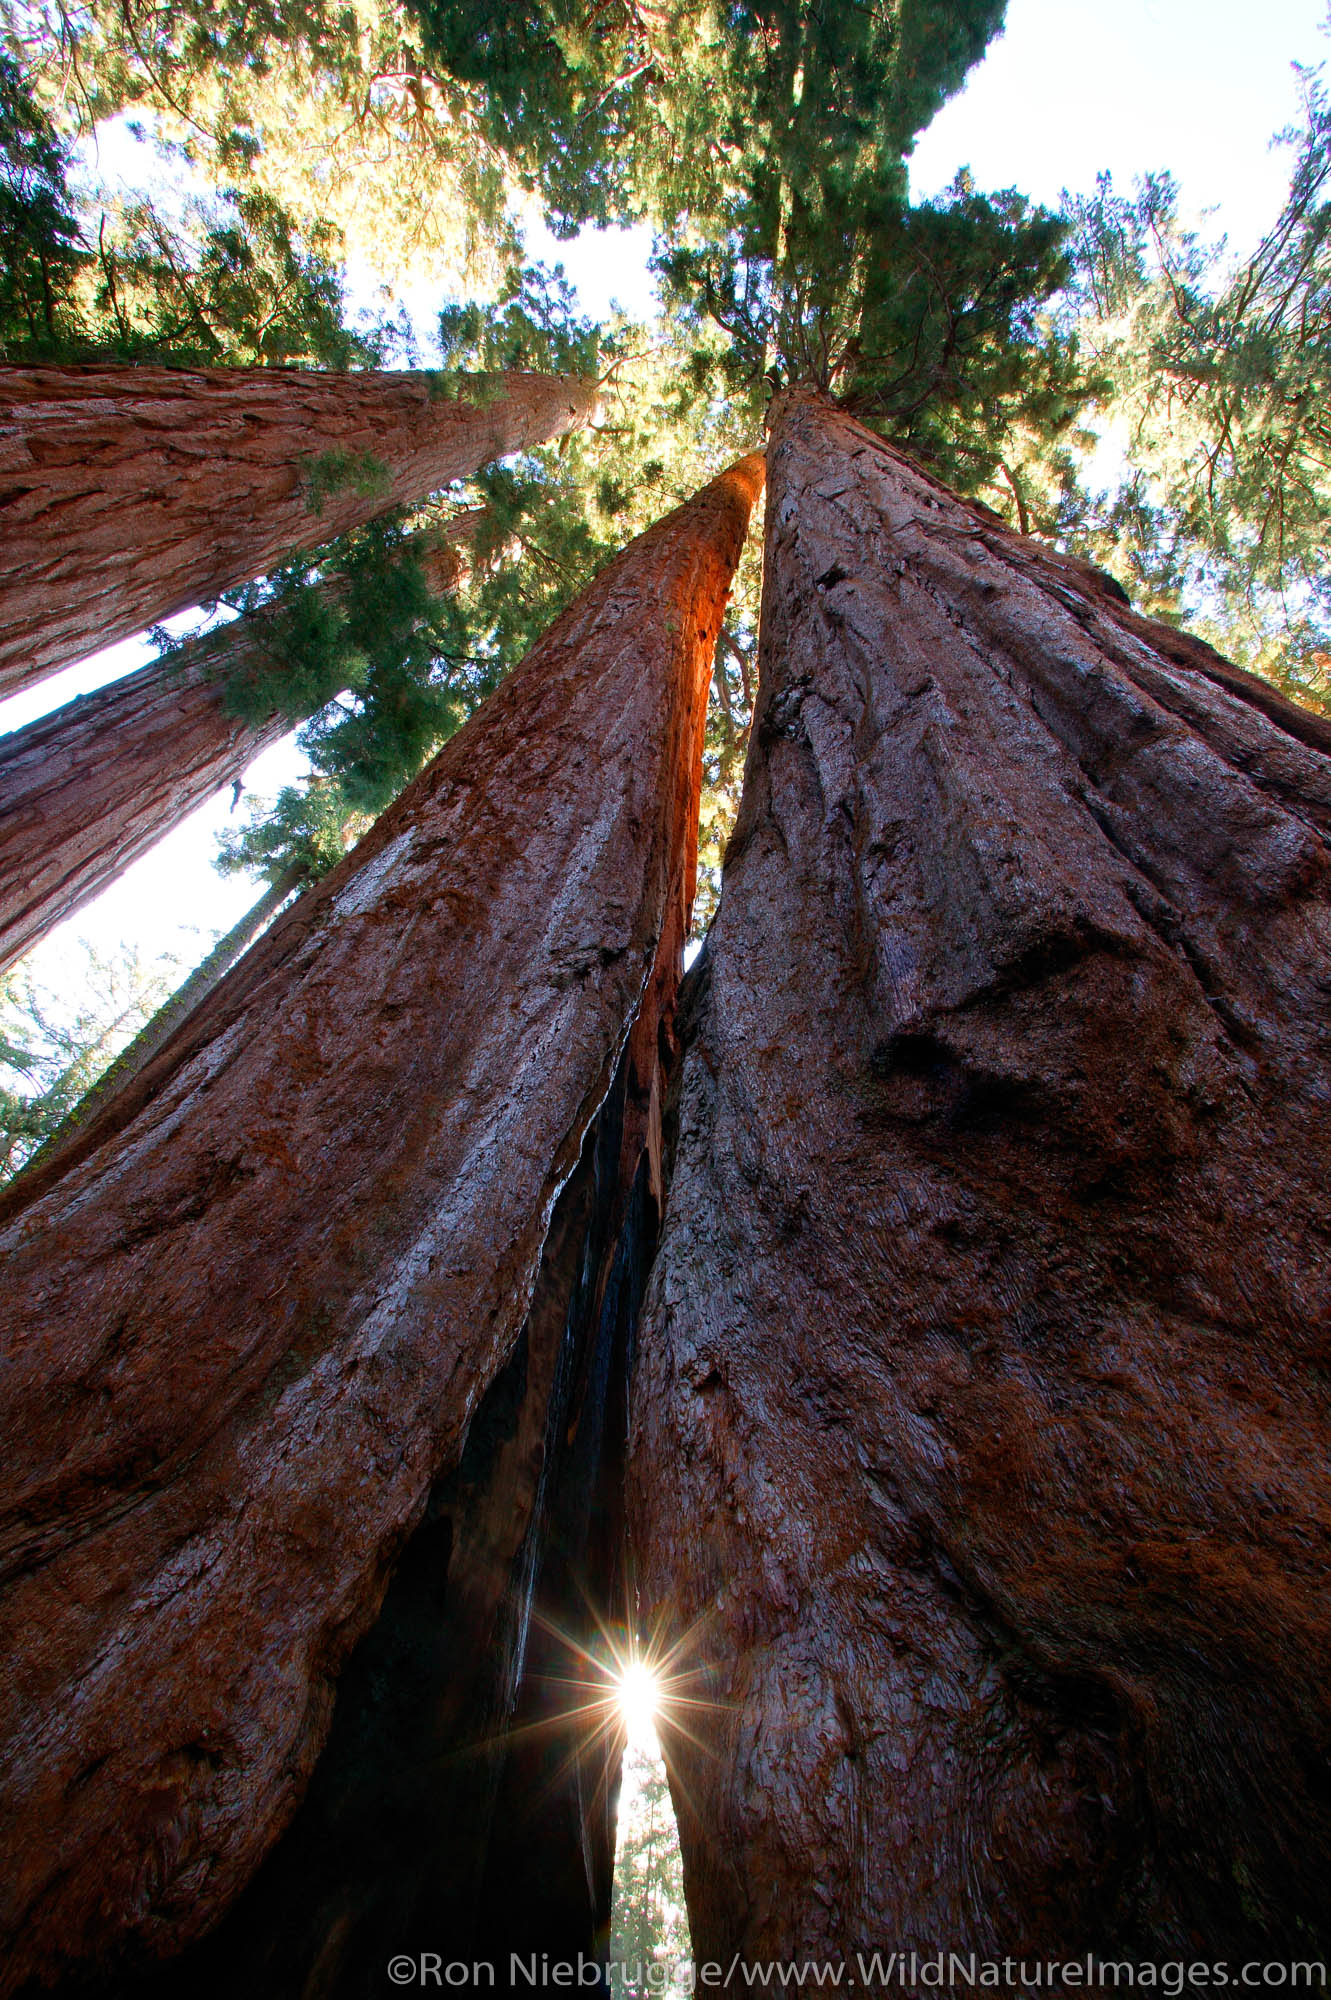 The giant Sequoia trees in Sequoia National Park, California.